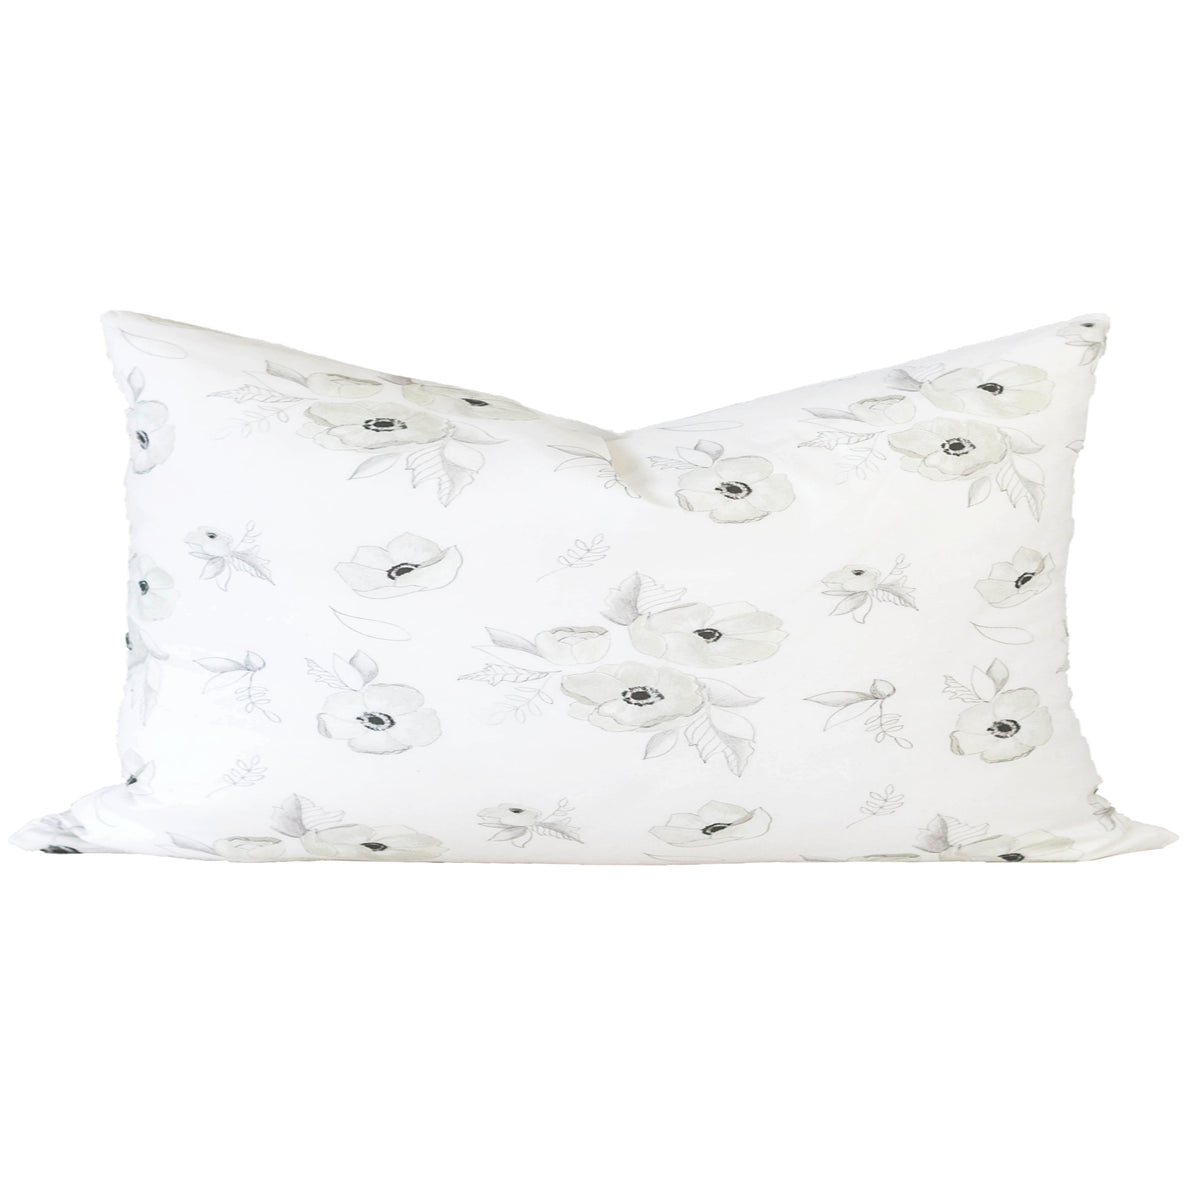 Emmy Pillow Cover